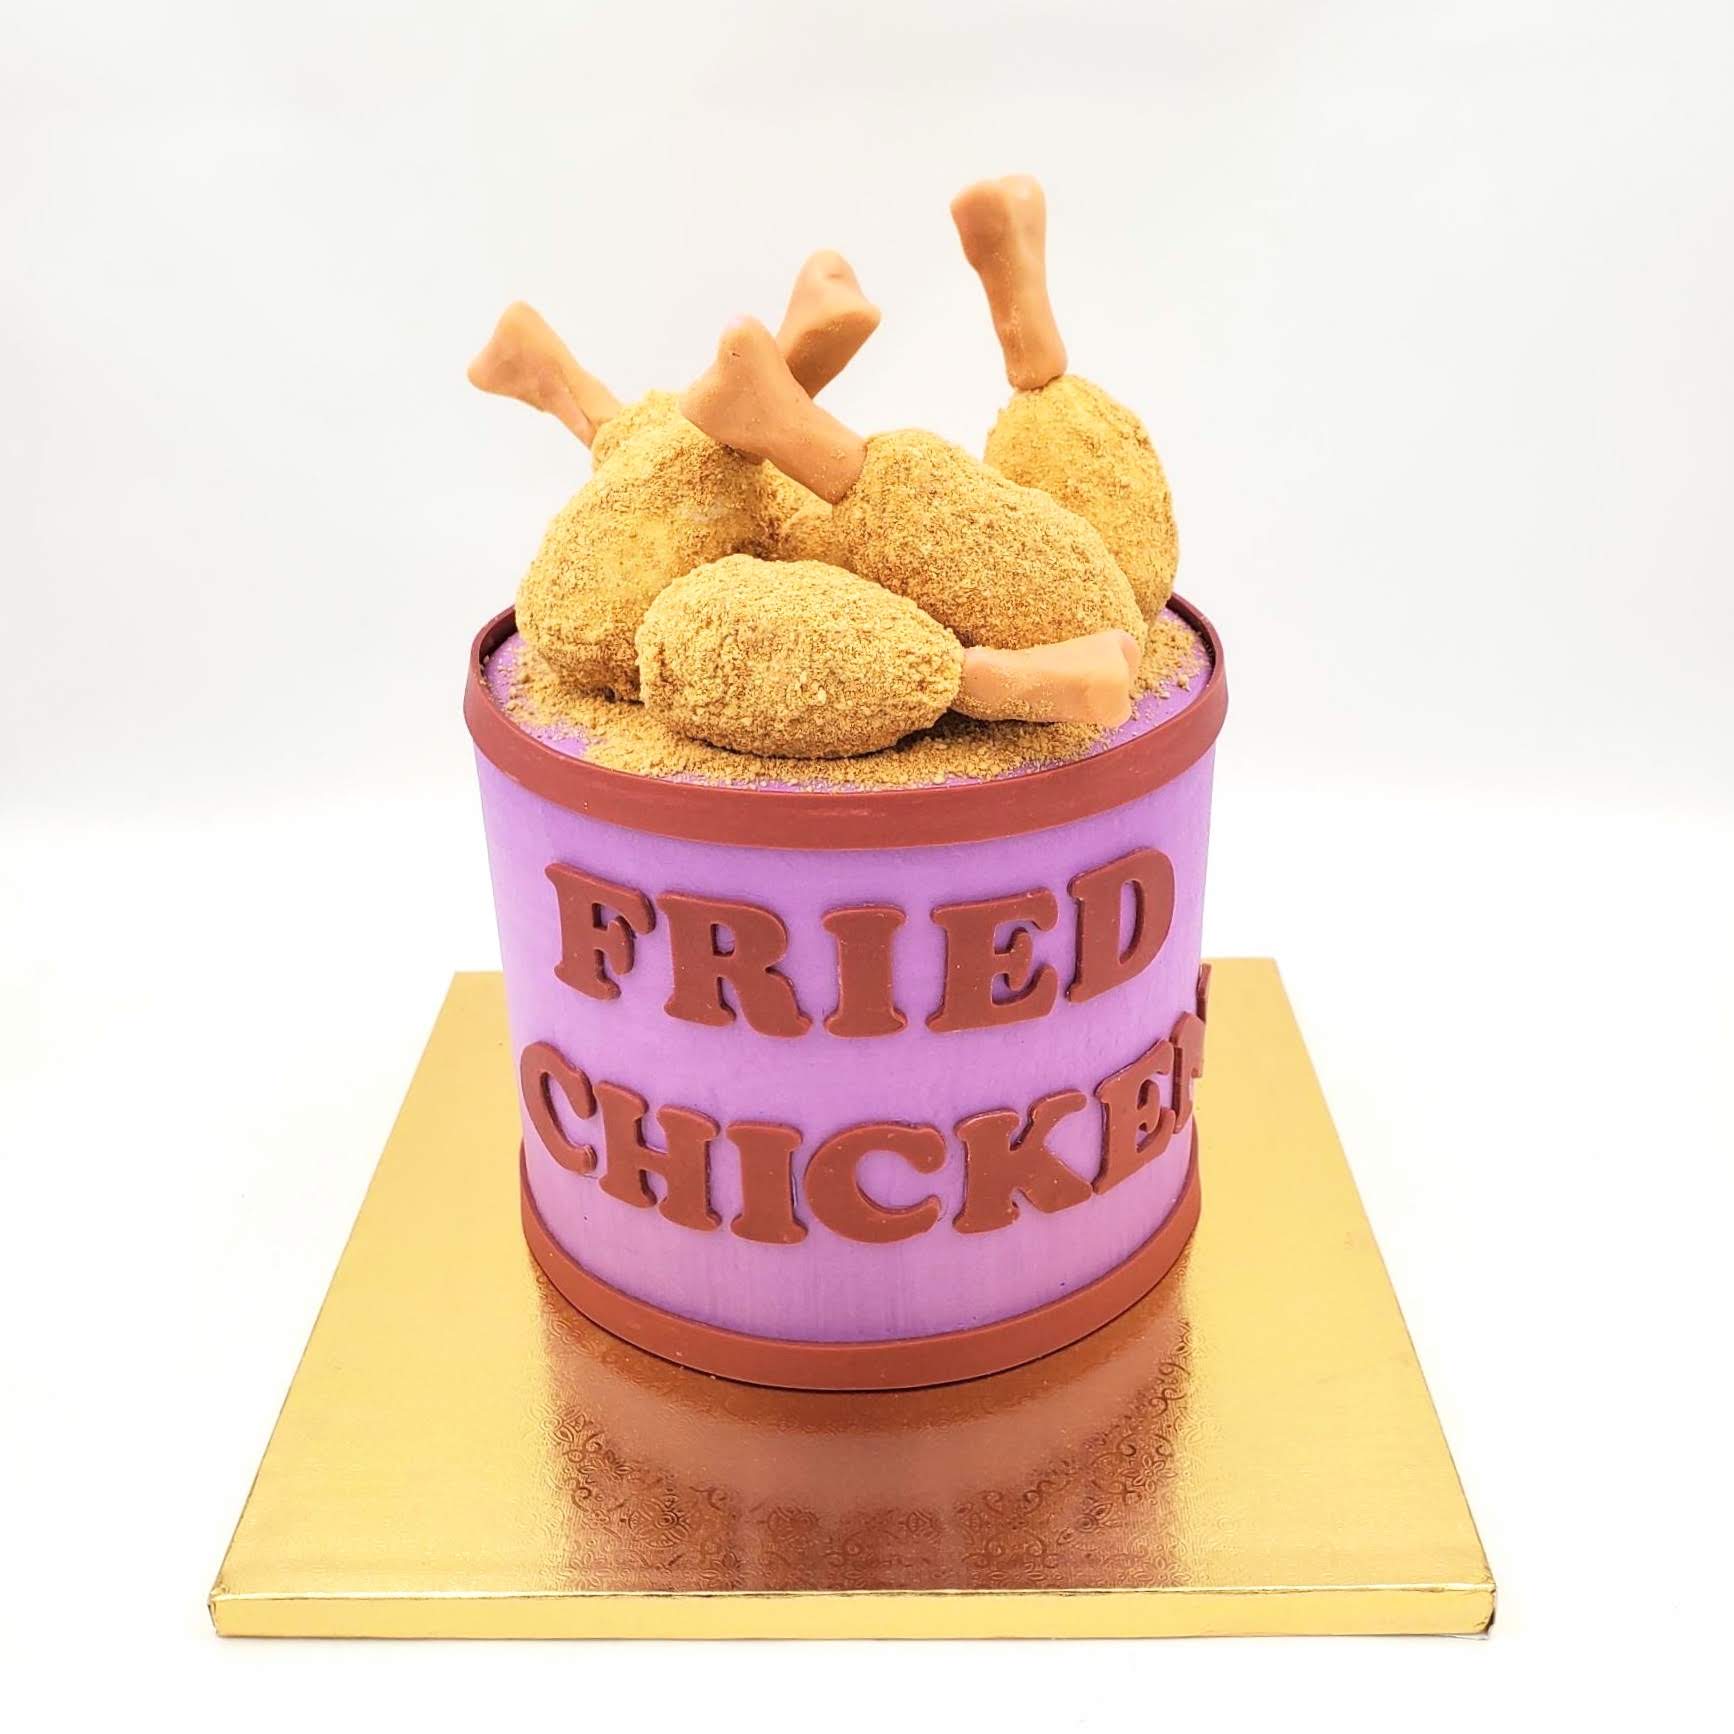 Coolest DIY Birthday Cakes | Chickens - All Cakes